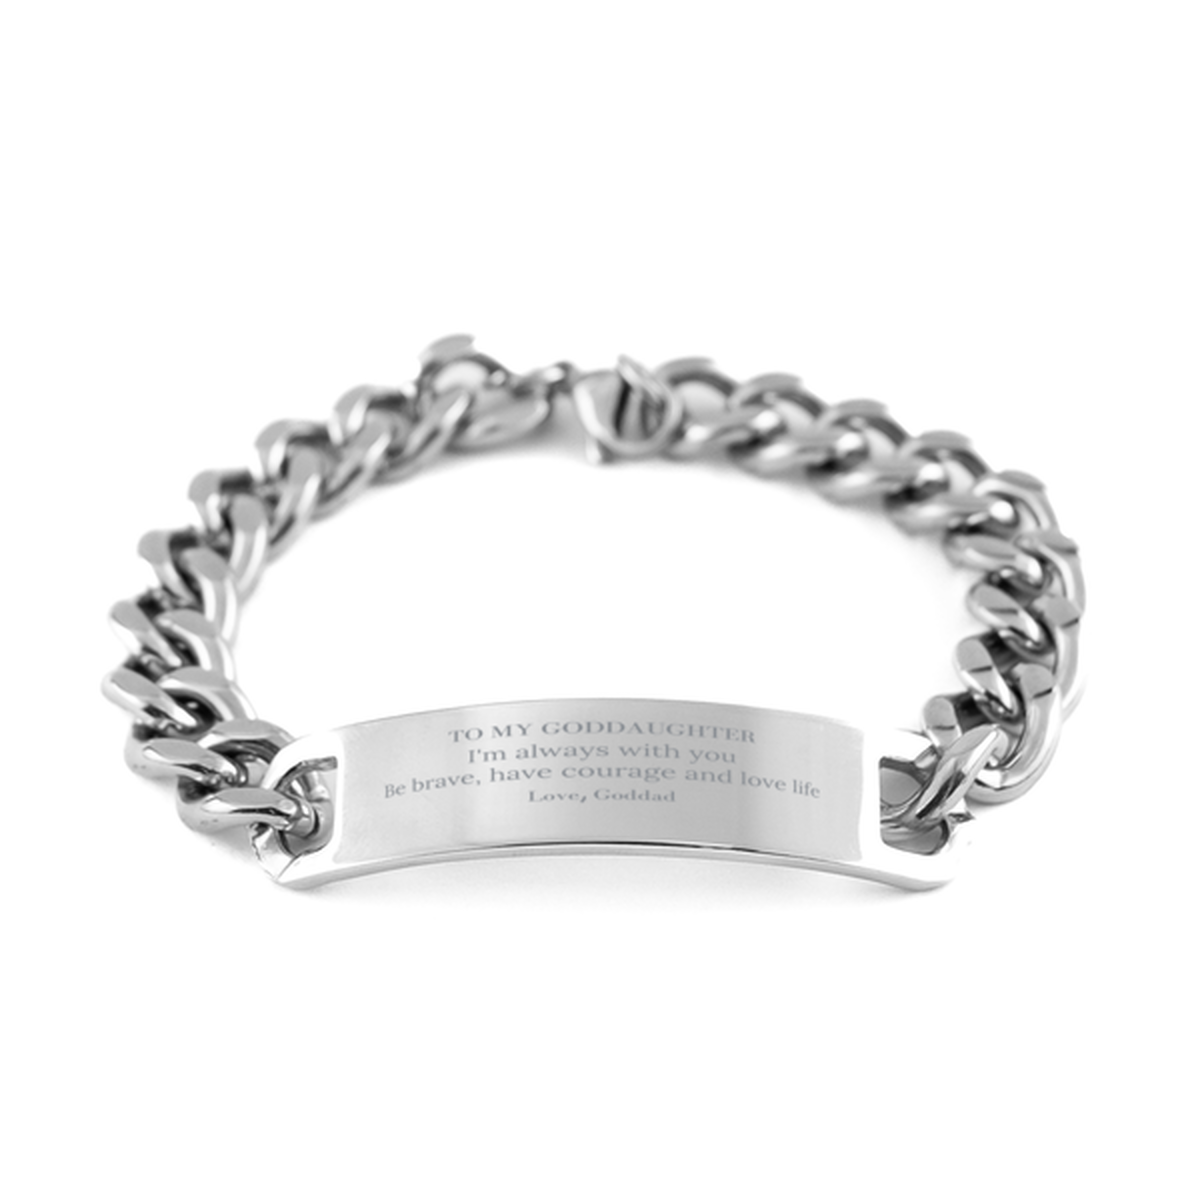 To My Goddaughter Gifts from Goddad, Unique Cuban Chain Stainless Steel Bracelet Inspirational Christmas Birthday Graduation Gifts for Goddaughter I'm always with you. Be brave, have courage and love life. Love, Goddad